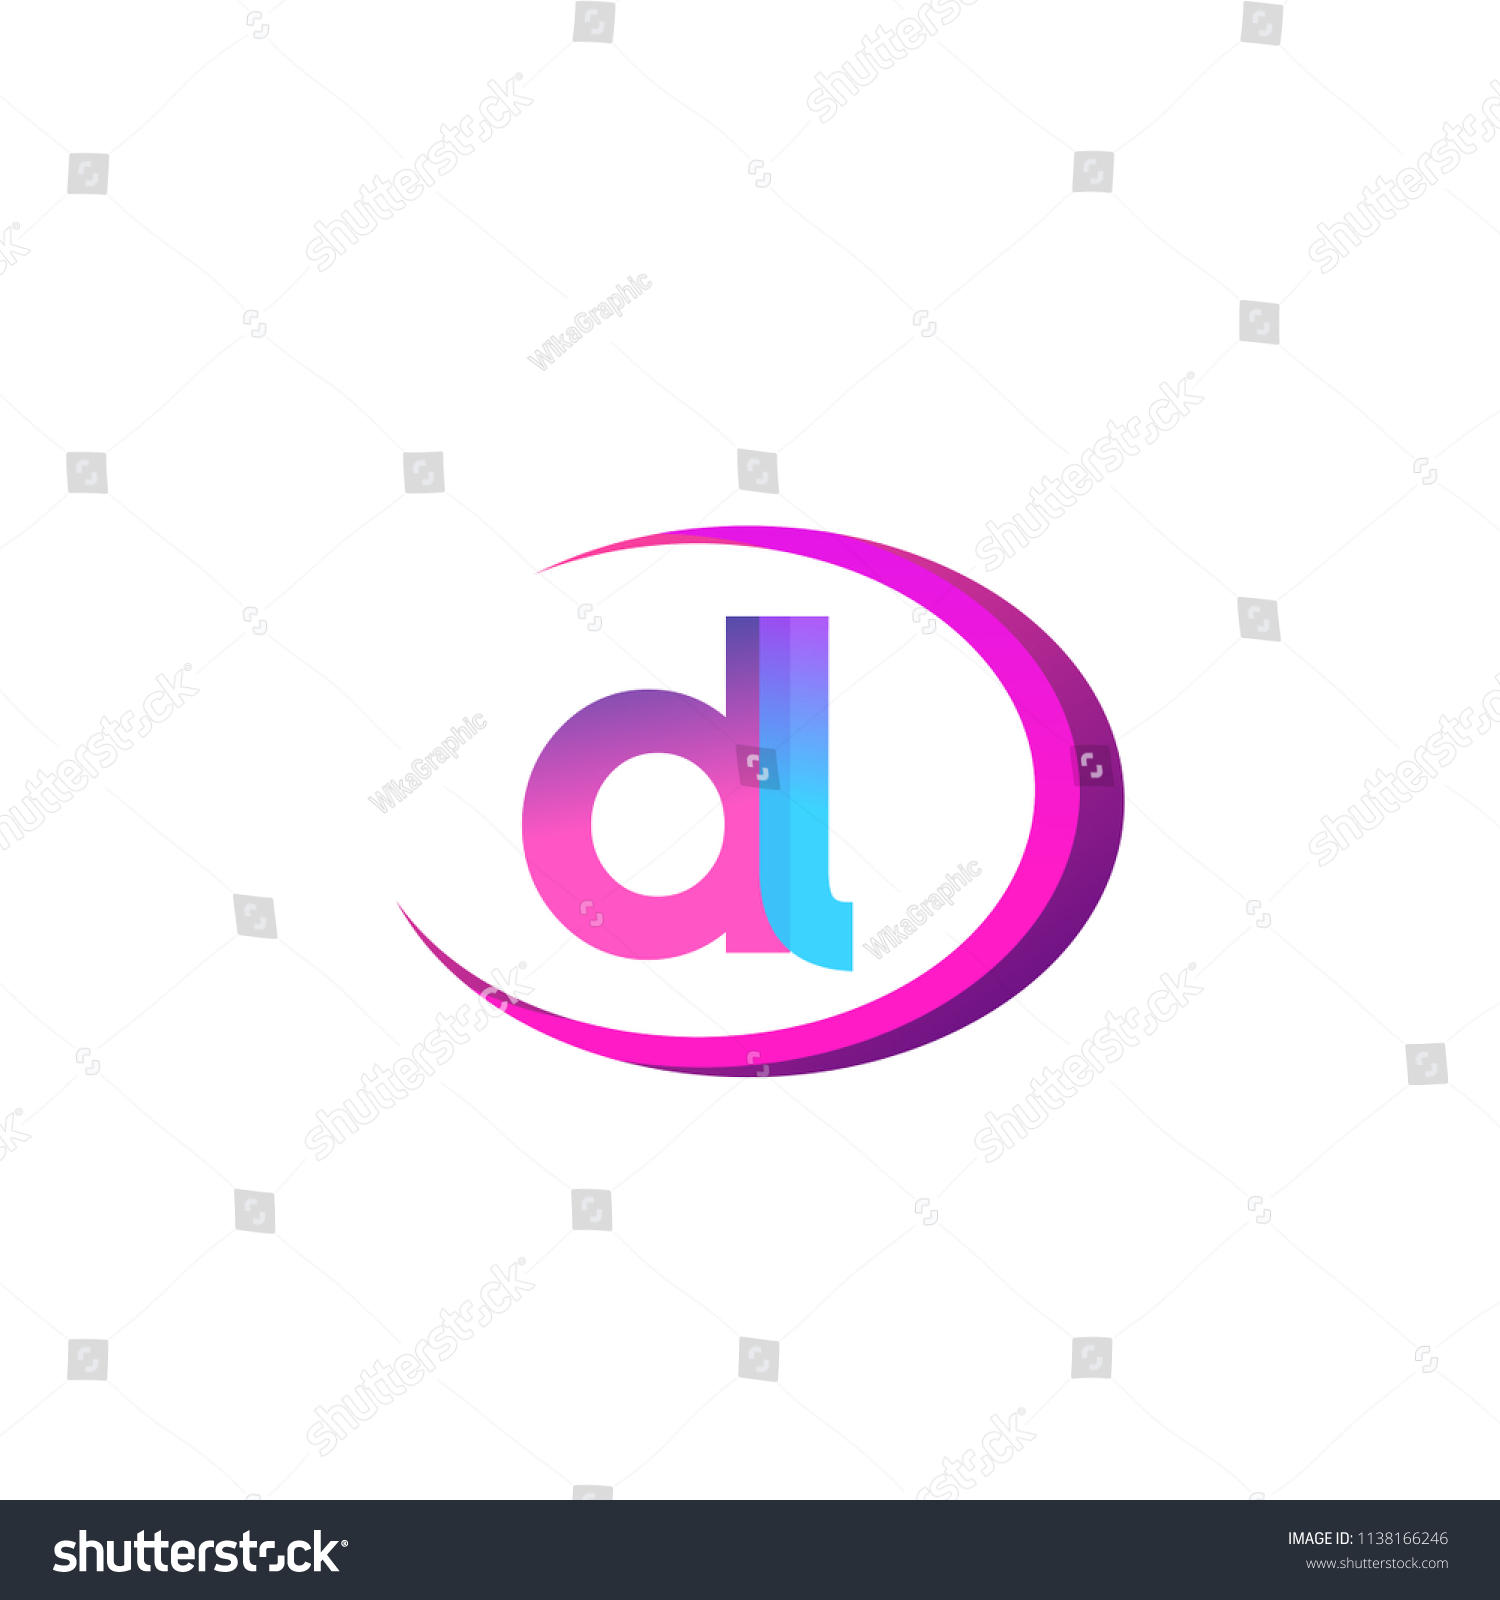 Initial Letter Dl Logotype Company Name Stock Vector (Royalty Free ...